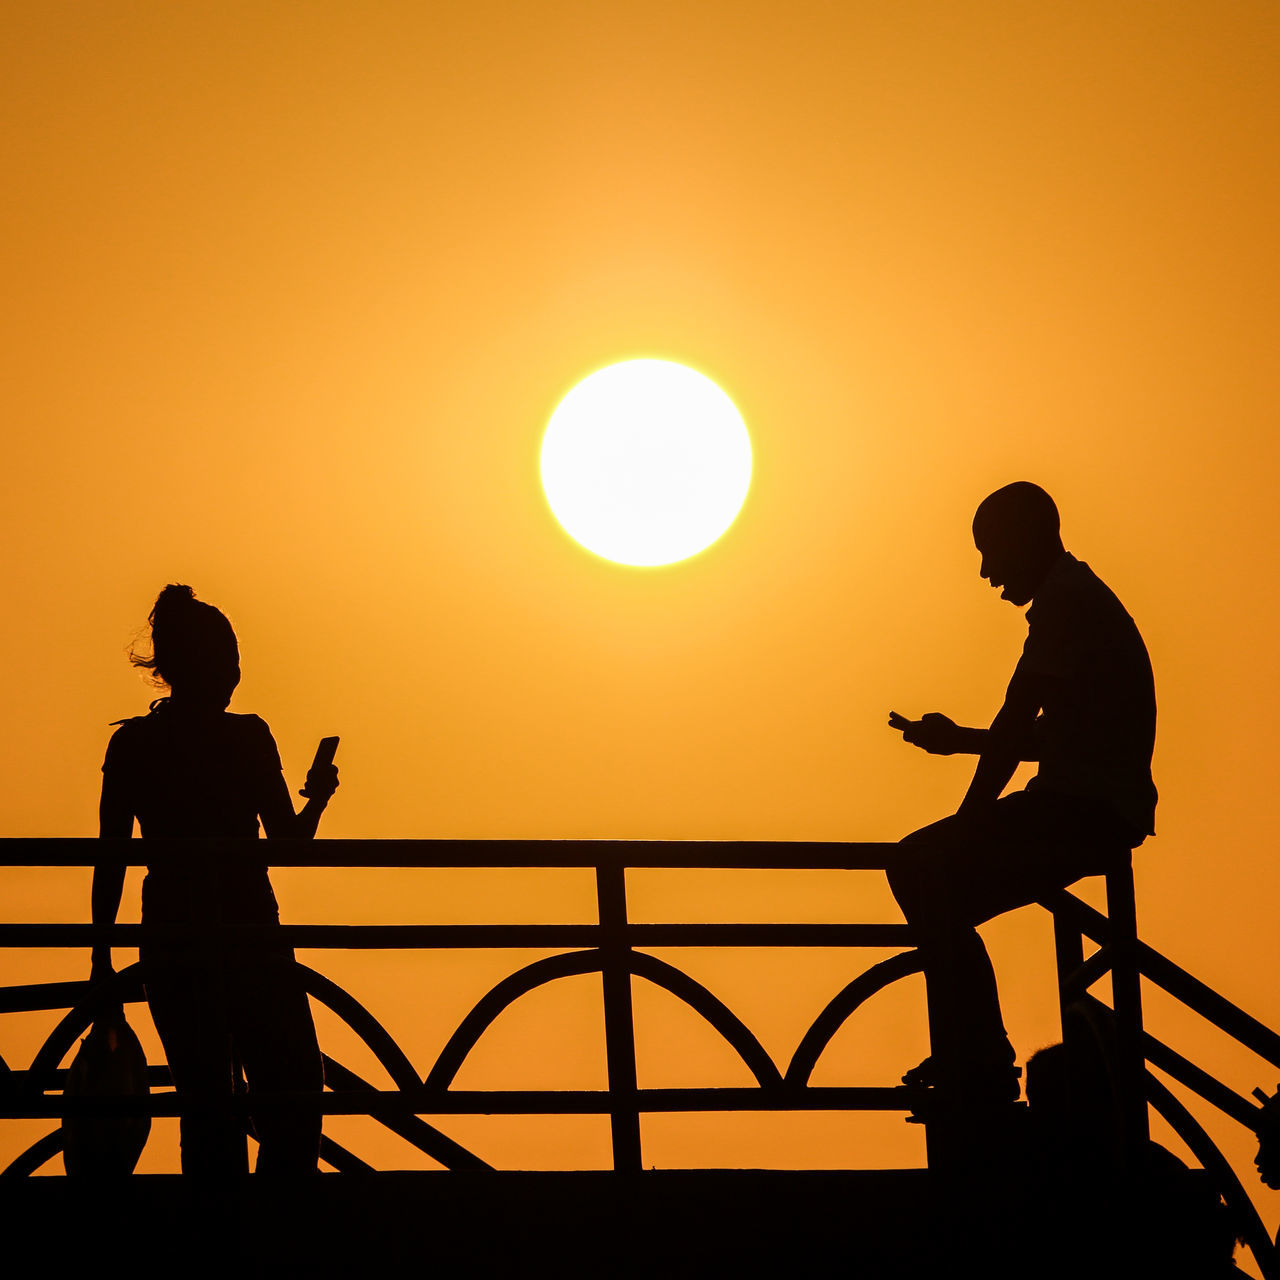 sunset, silhouette, real people, orange color, lifestyles, men, leisure activity, sky, beauty in nature, sun, standing, people, scenics - nature, two people, nature, water, togetherness, railing, clear sky, outdoors